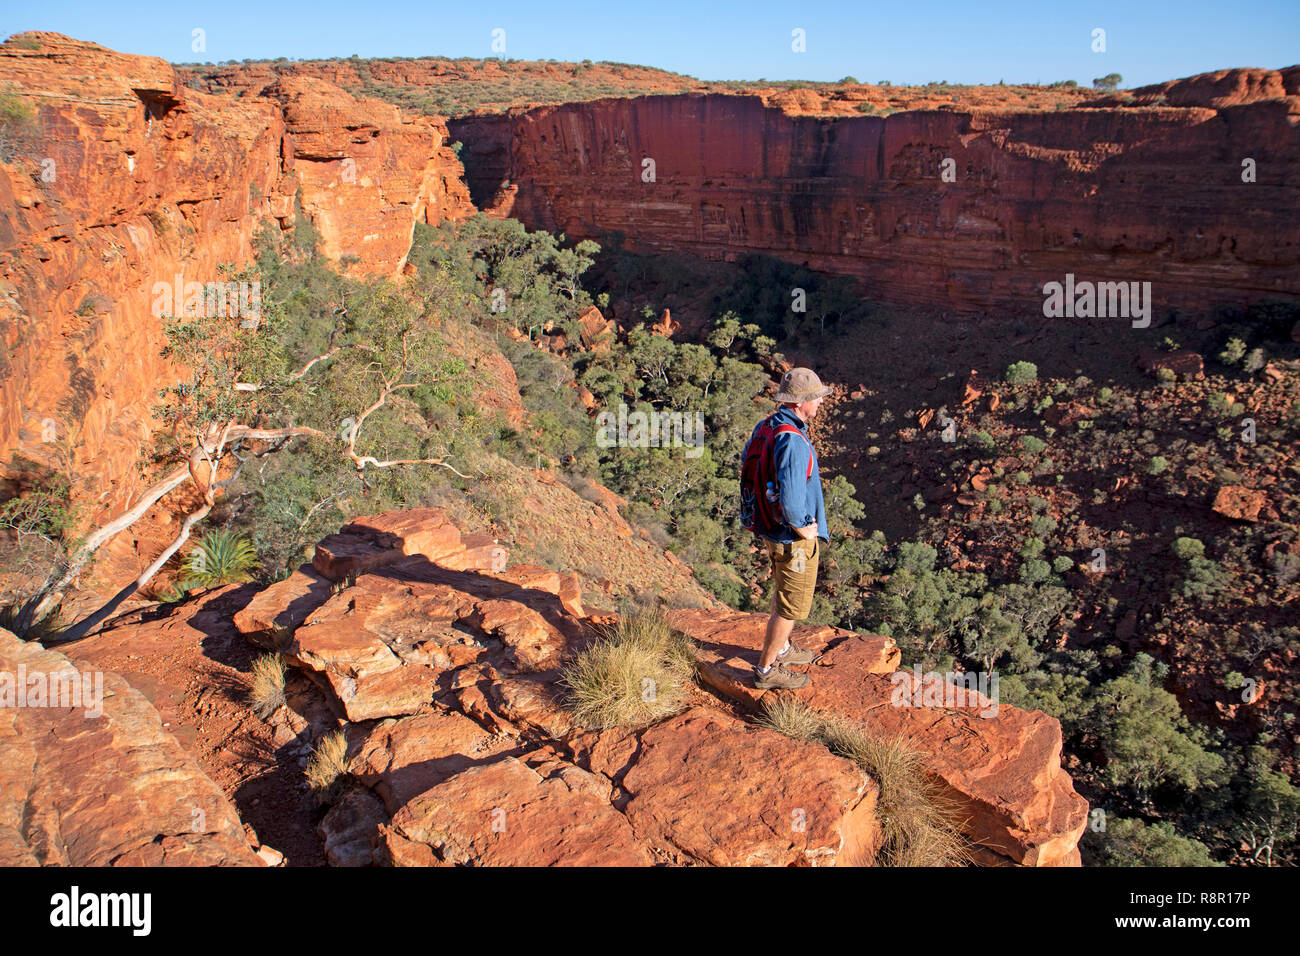 Watarrka National Park, Northern Territory, Australia, 20/10/2018: Man standing at the edge of the Kings Canyon rim, looking down into the canyon Stock Photo